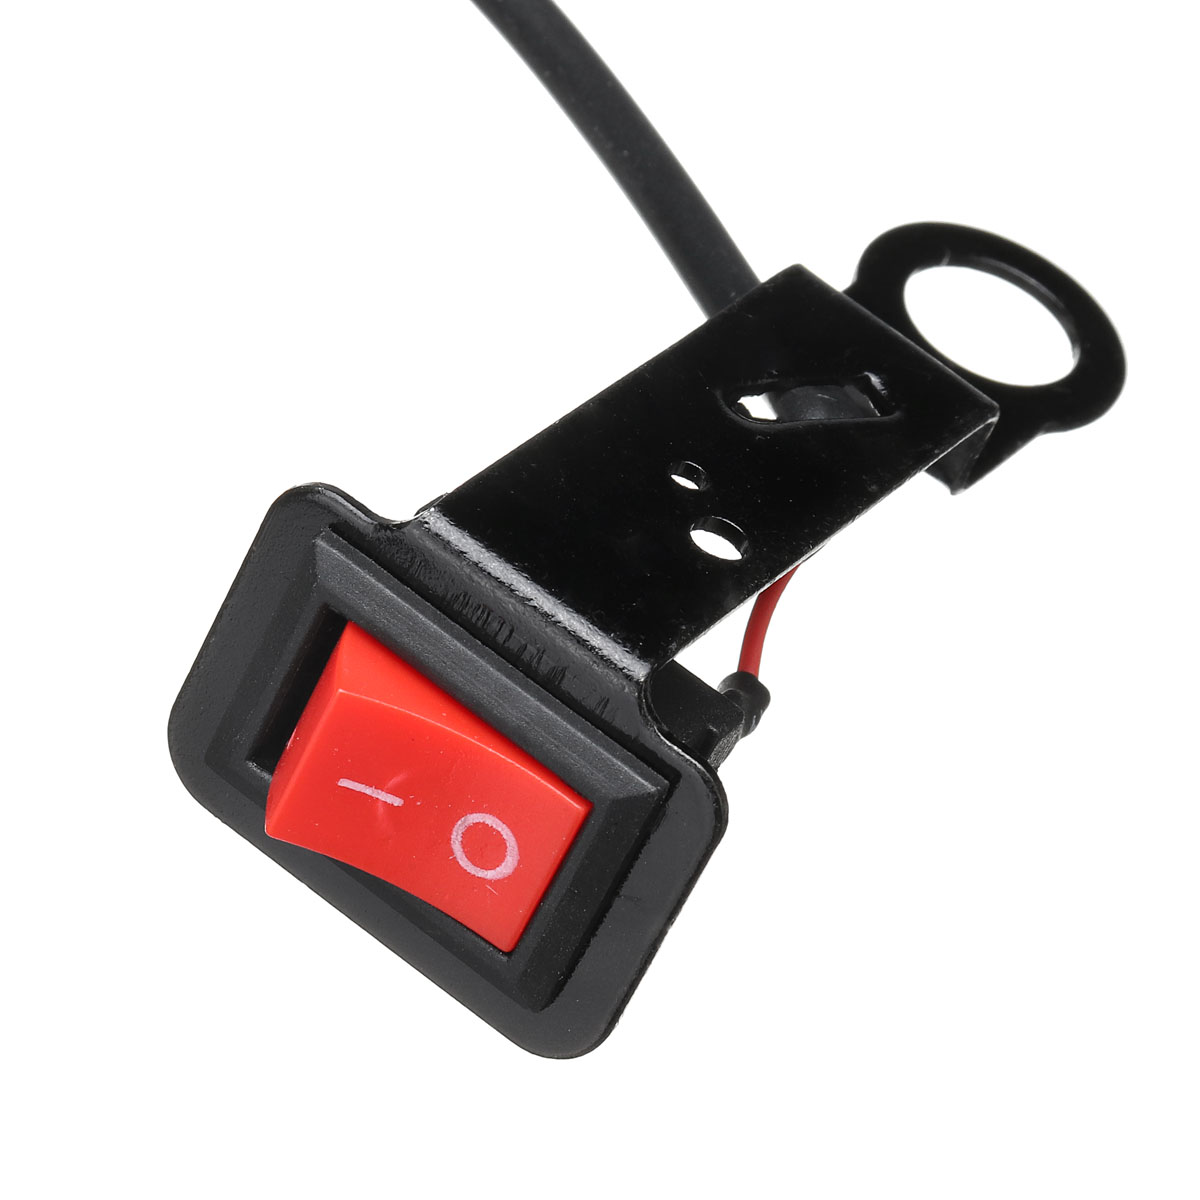 12V-15W-Motorcycle-Heating-Handle-Grip-Sleeve-Handlebar-Cover--Sheet-w-Switch-1397479